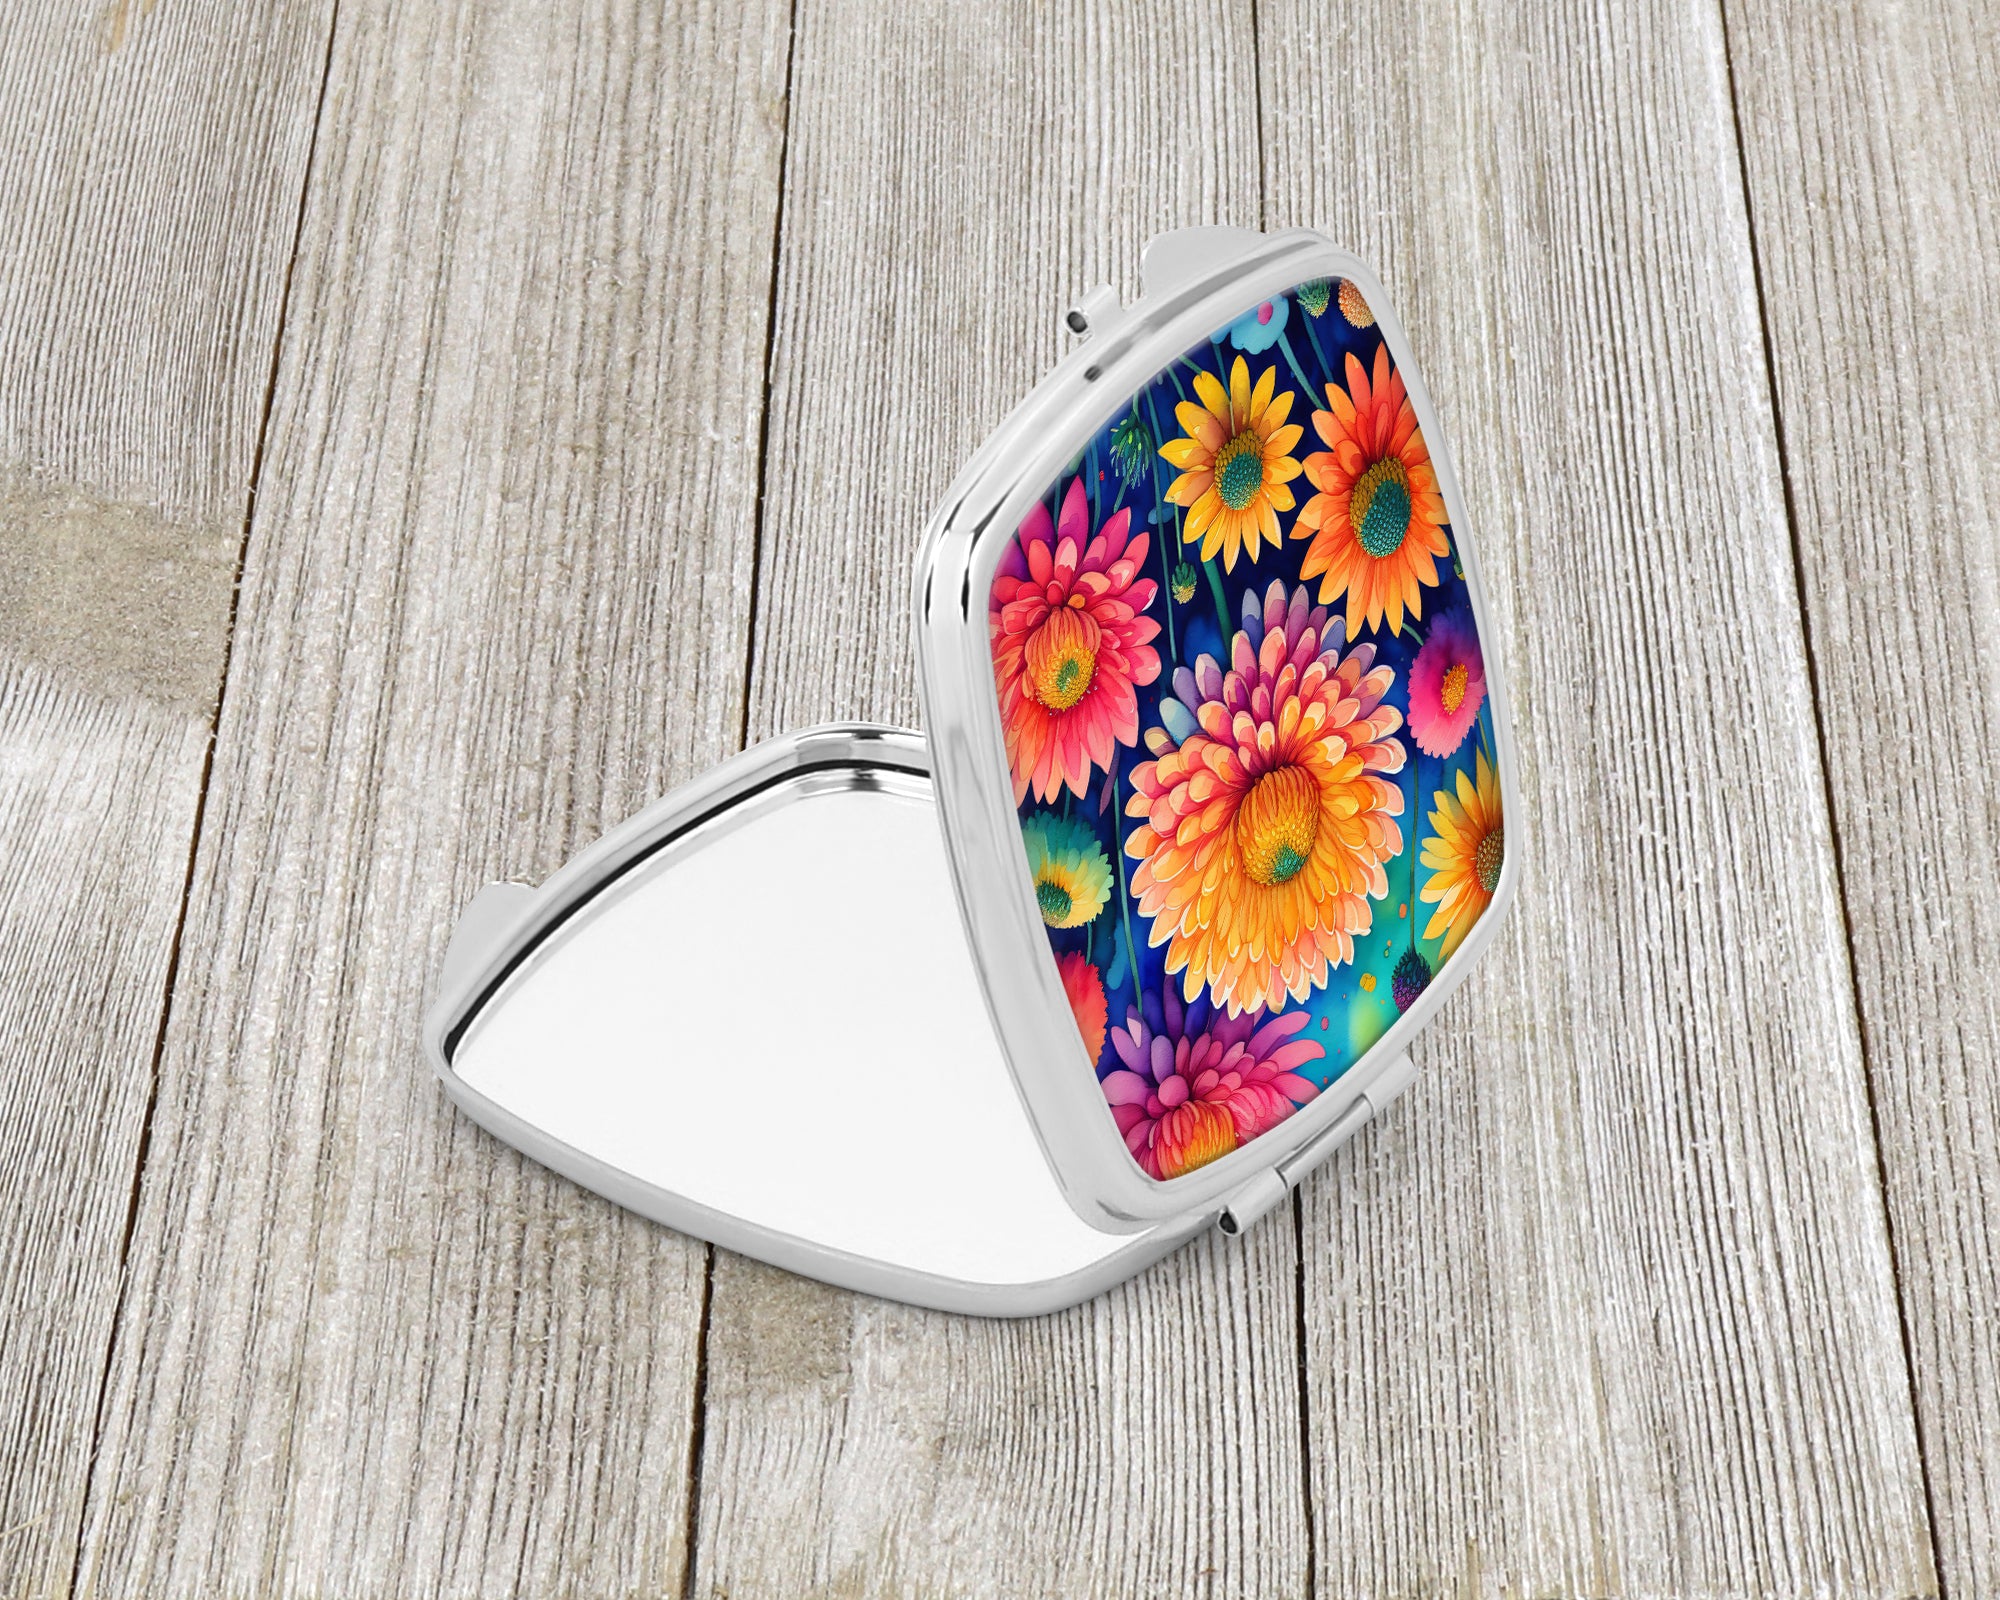 Buy this Colorful Chrysanthemums Compact Mirror